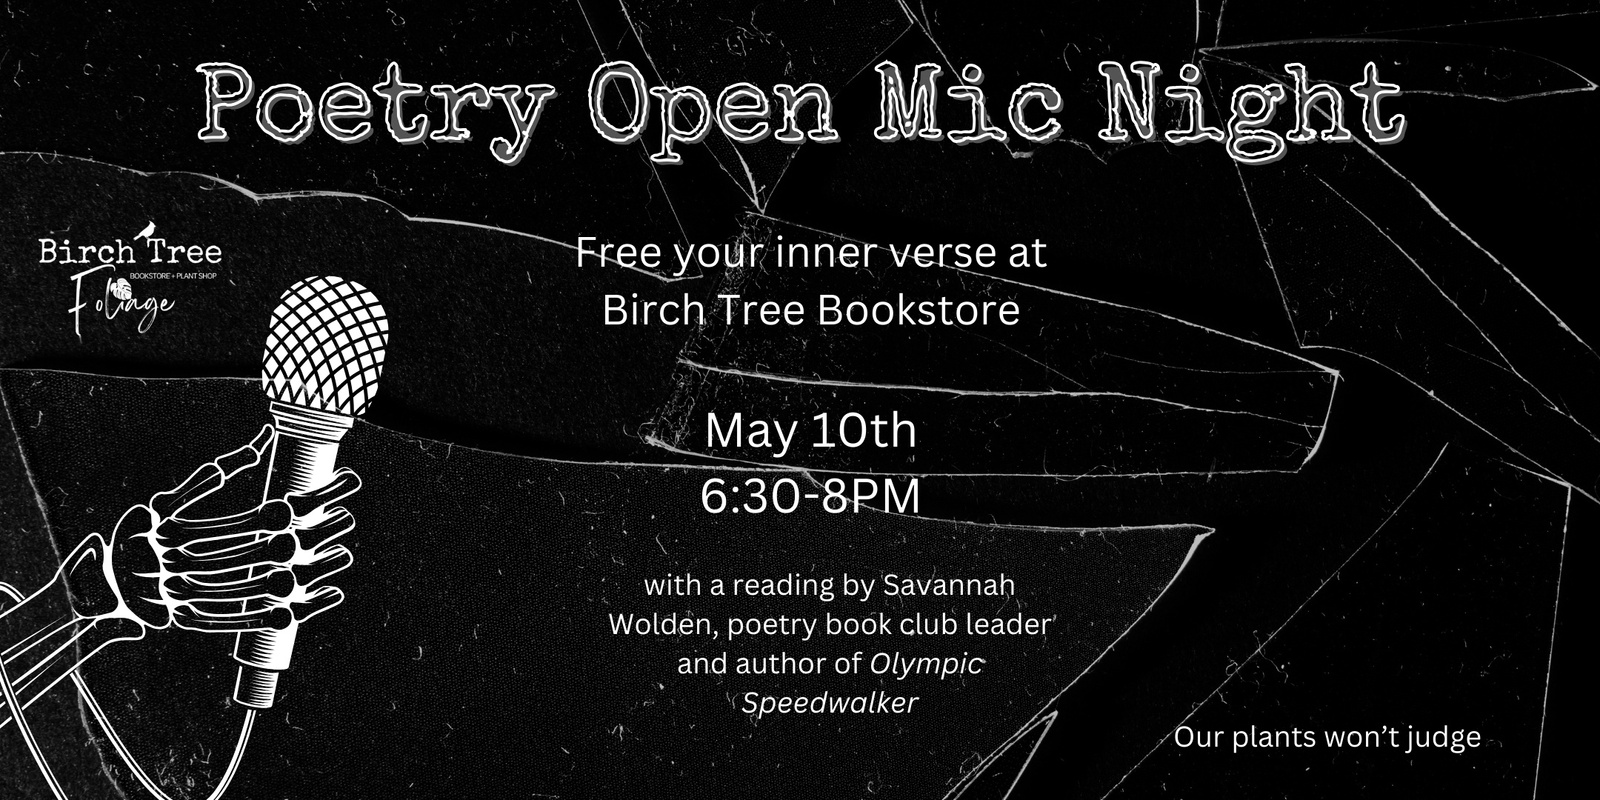 Banner image for Poetry Open Mic Night